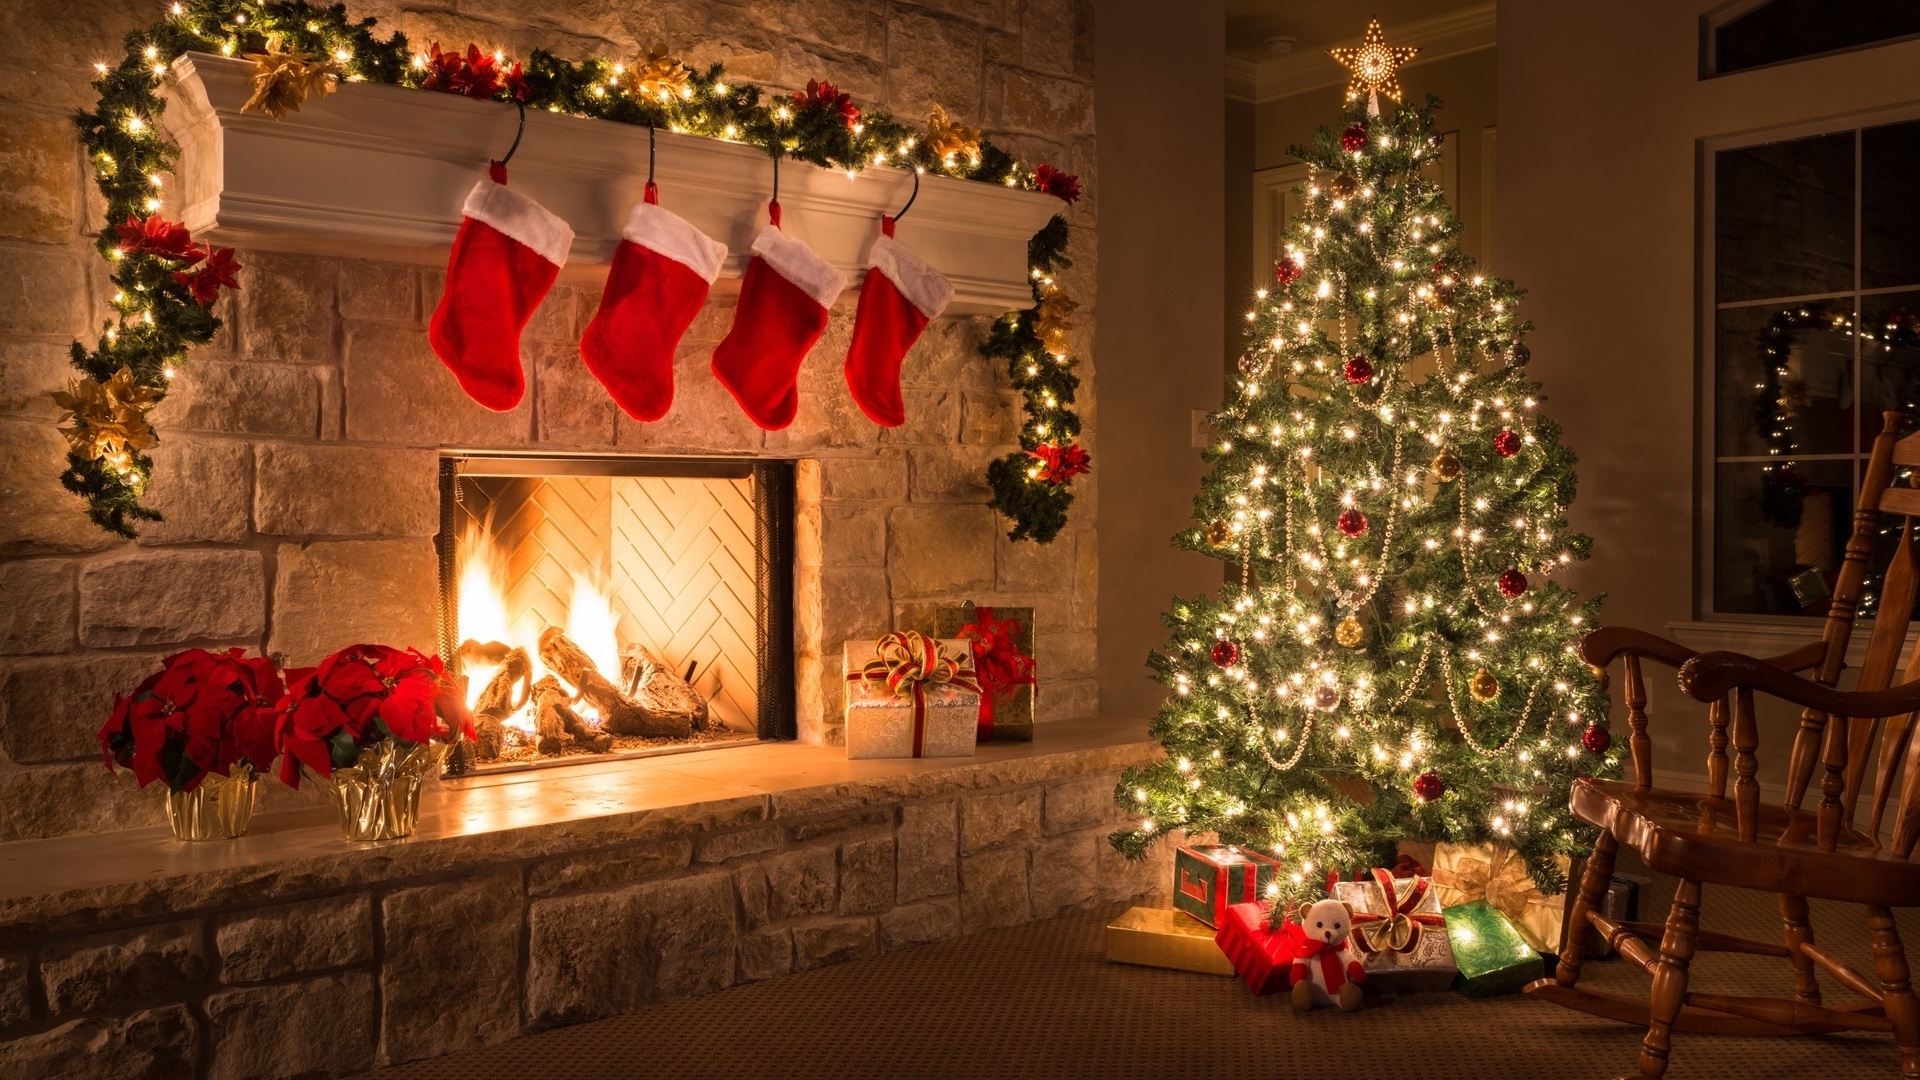 Decorated Christmas Tree In House Wallpaper - Christmas Home Facebook Cover , HD Wallpaper & Backgrounds